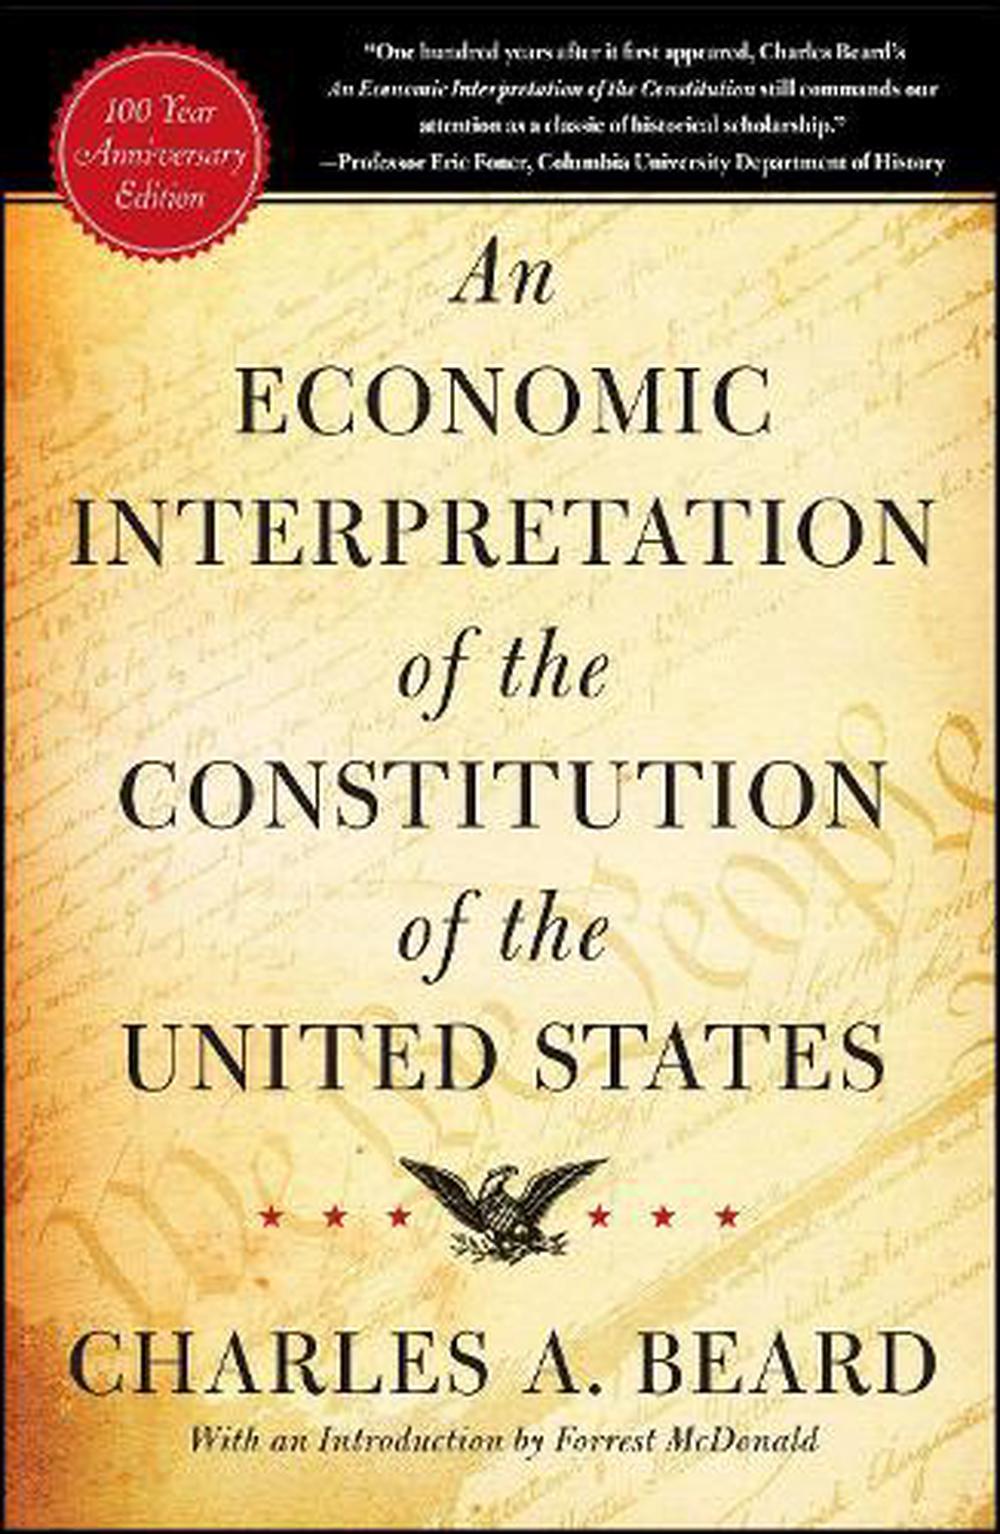 How Has The Constitution Shaped The Economic